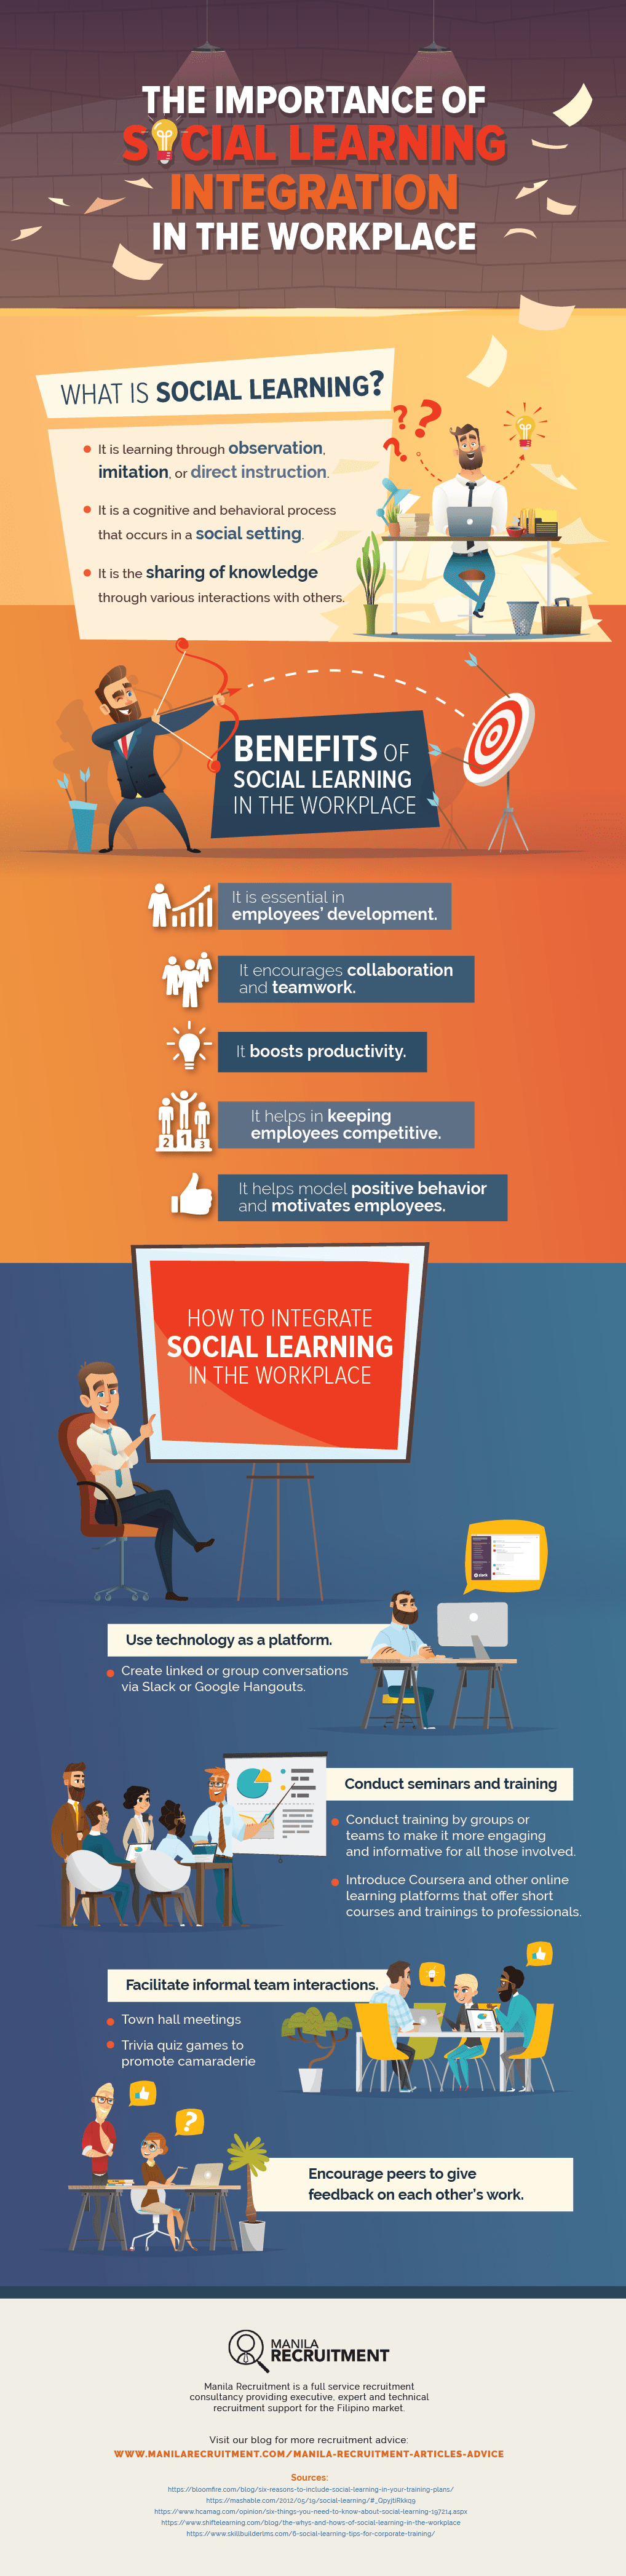 How to Incorporate Social Learning in the Workplace